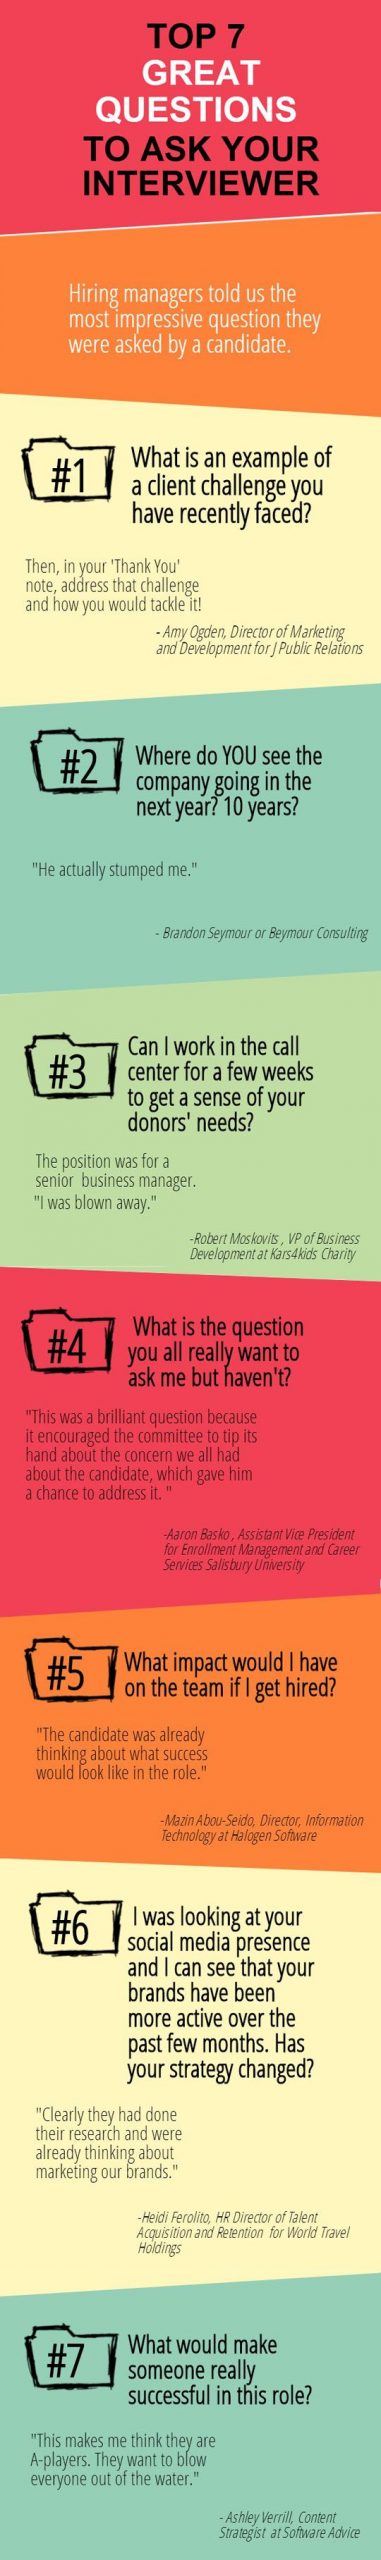 Infographic on Top 7 Questions to ask in an interview